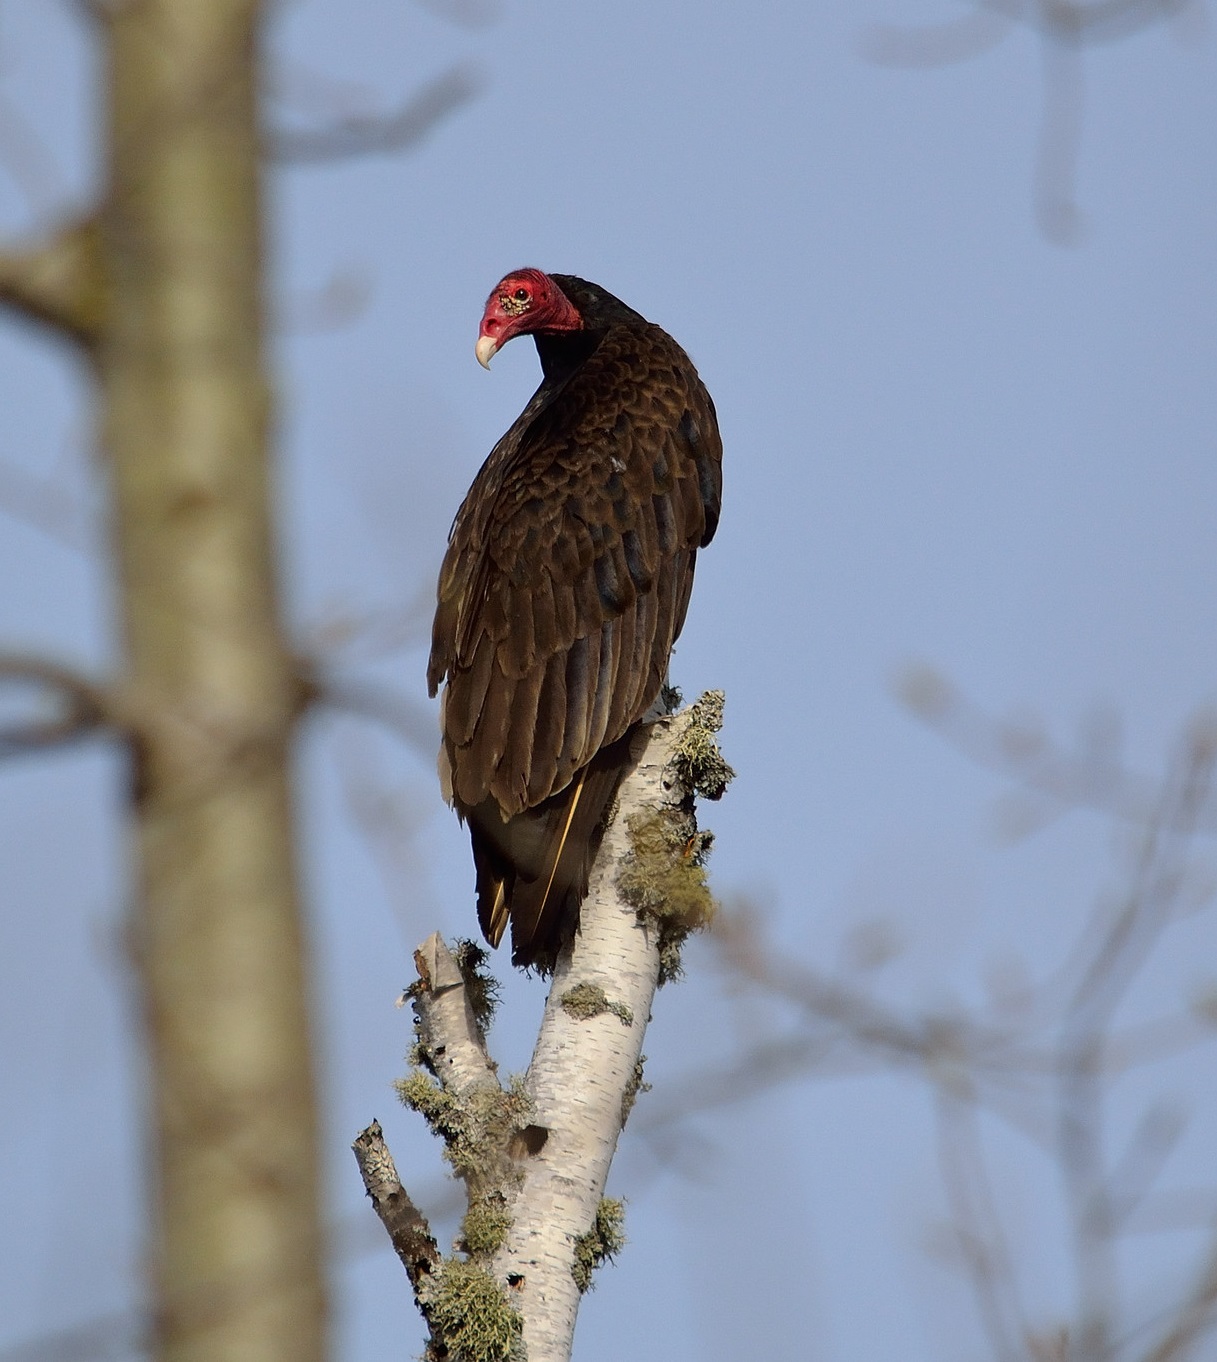 A turkey vulture is perched on a tree snag. It has a red featherless head and its large body is covered in black feathers that shine in the sunlight.